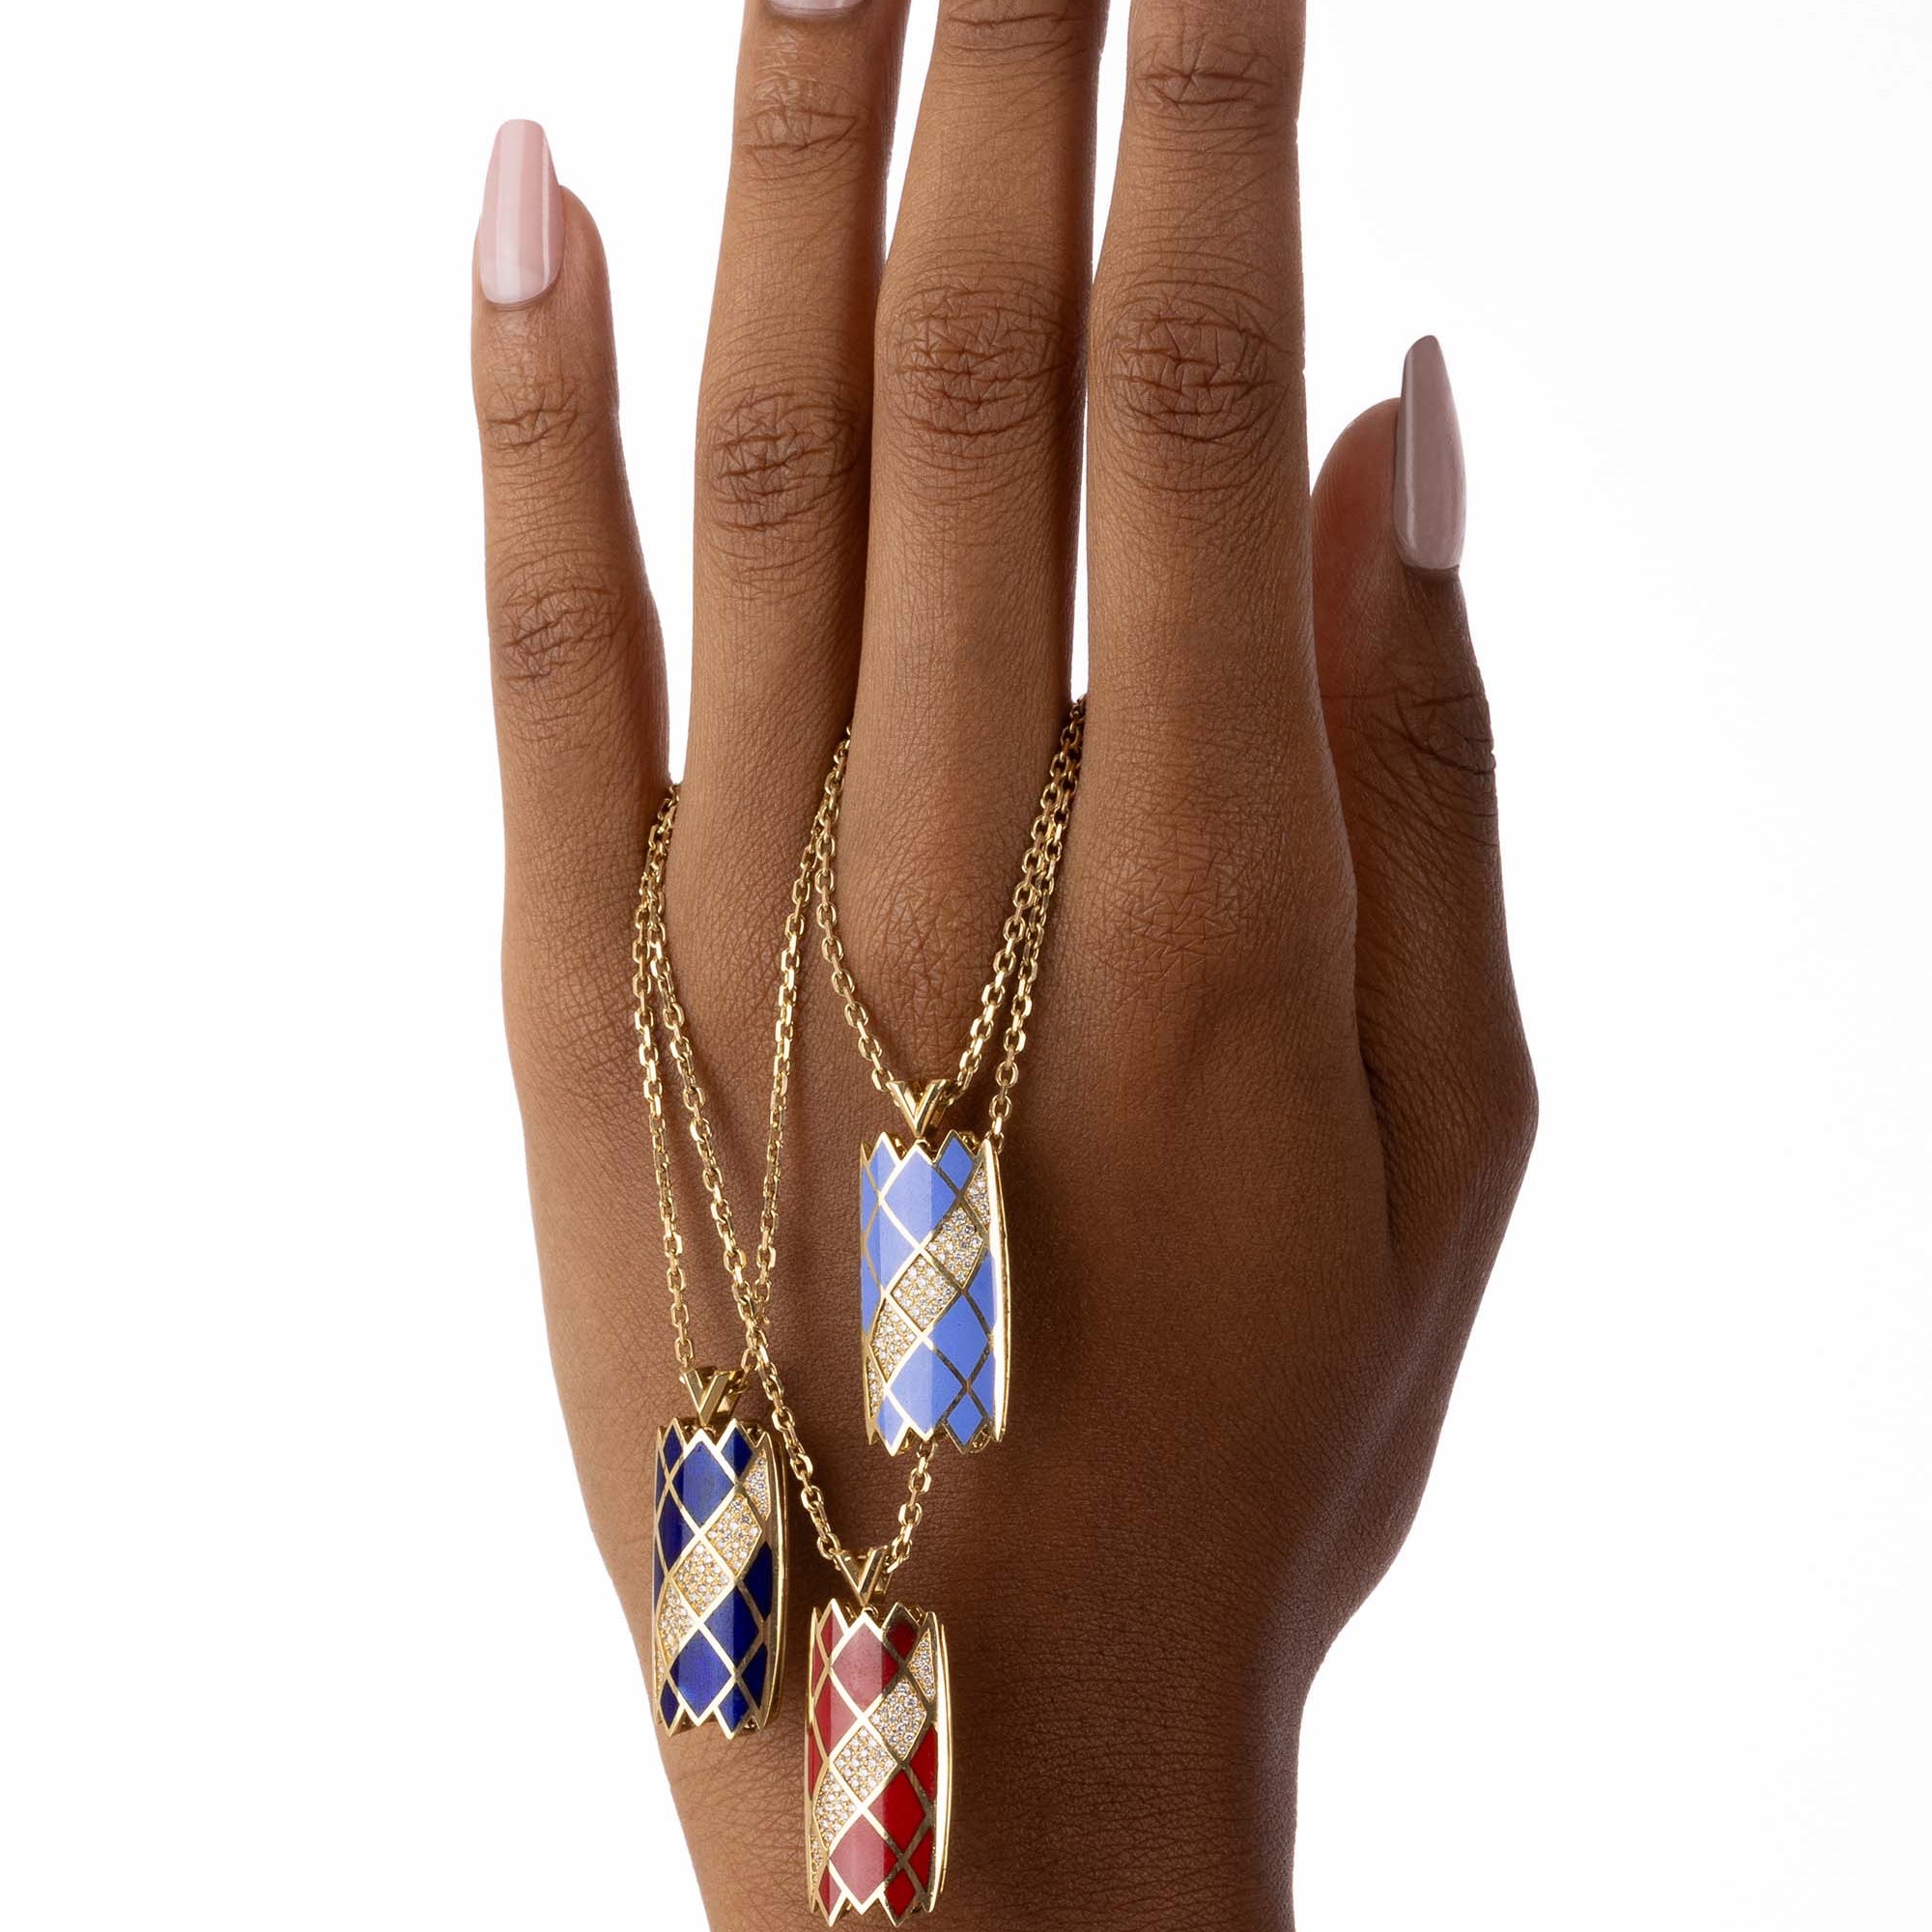 Three Castle Necklaces in light blue, dark blue, and red are draped over a model’s hand